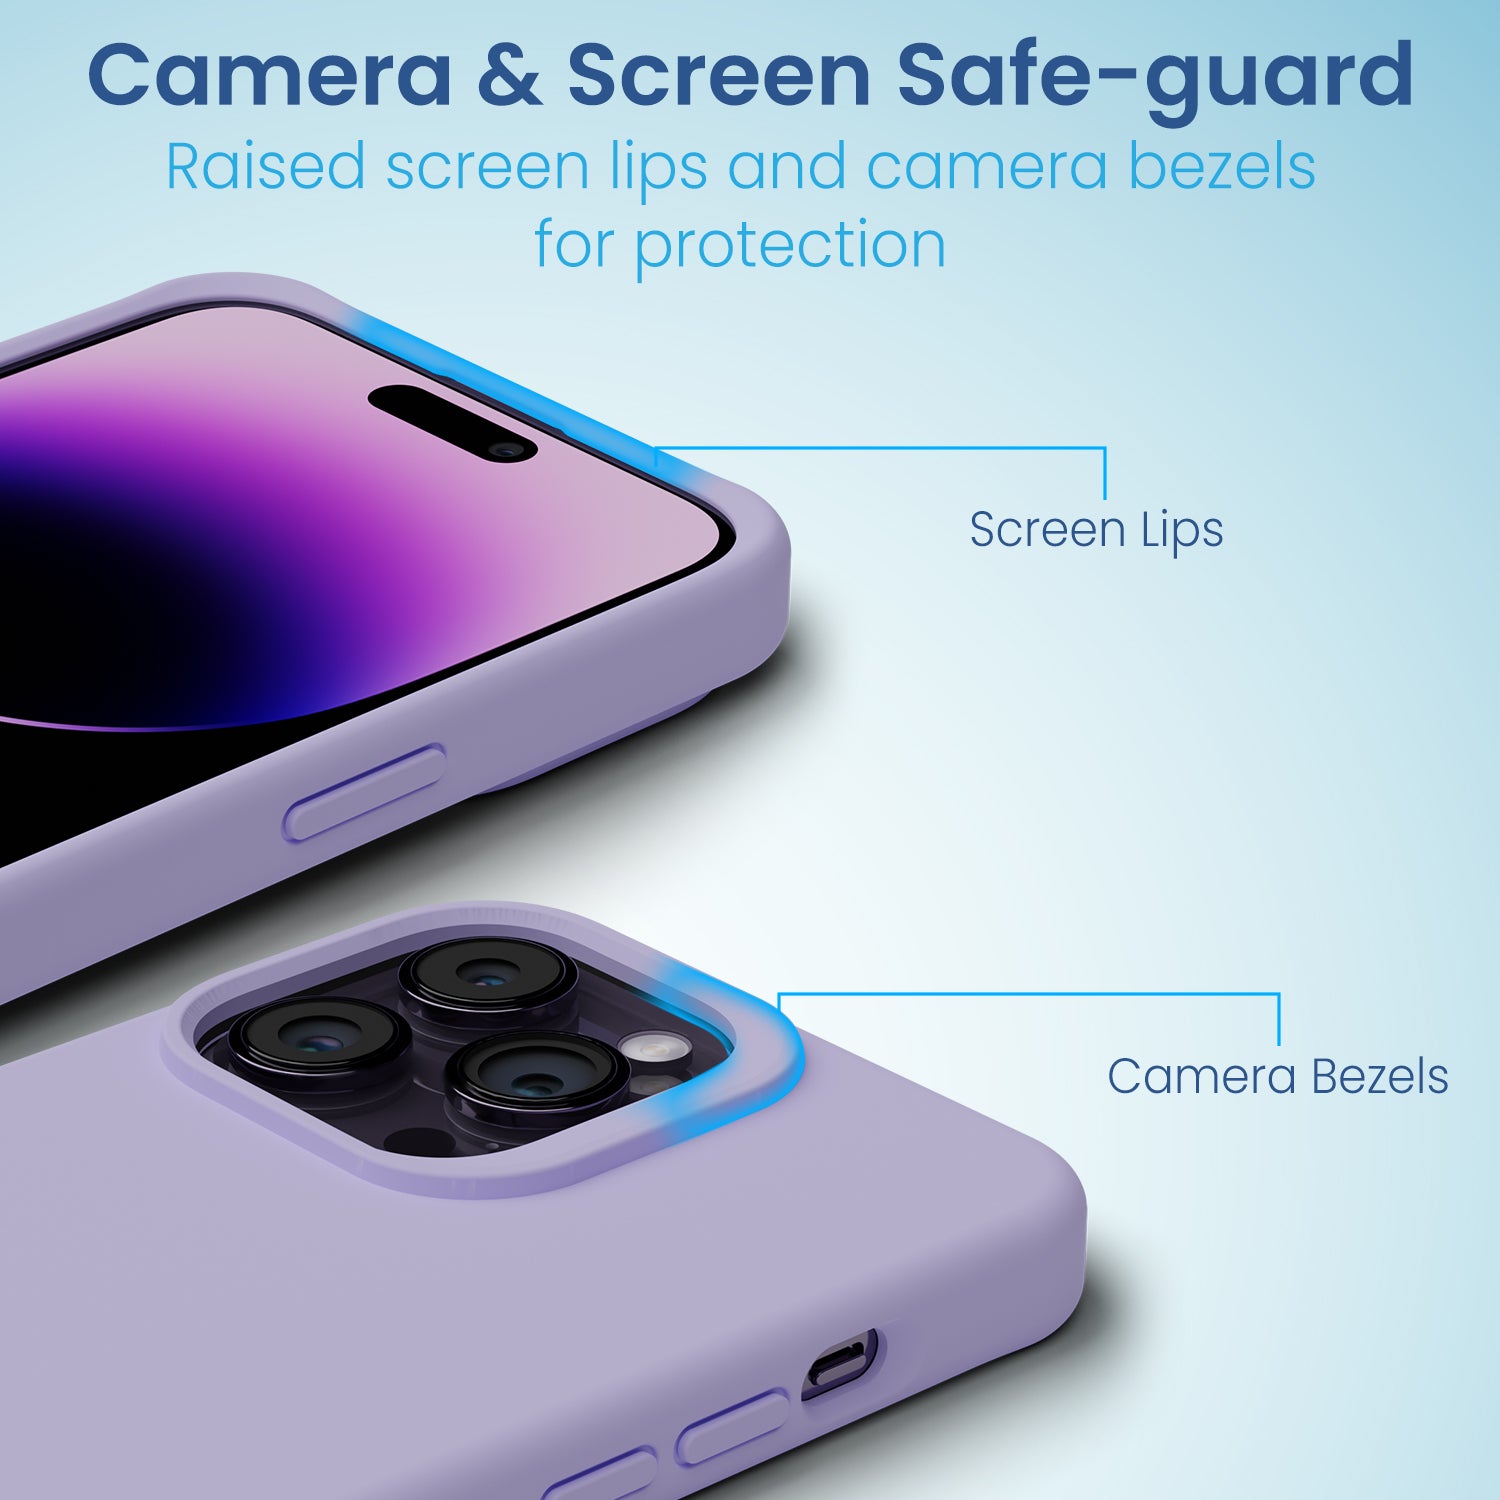 Remson Mag-X Magnetic Hybrid Protective Silicone Case Military Grade Protection Compatible For iPhone 14 Pro Max - Purple